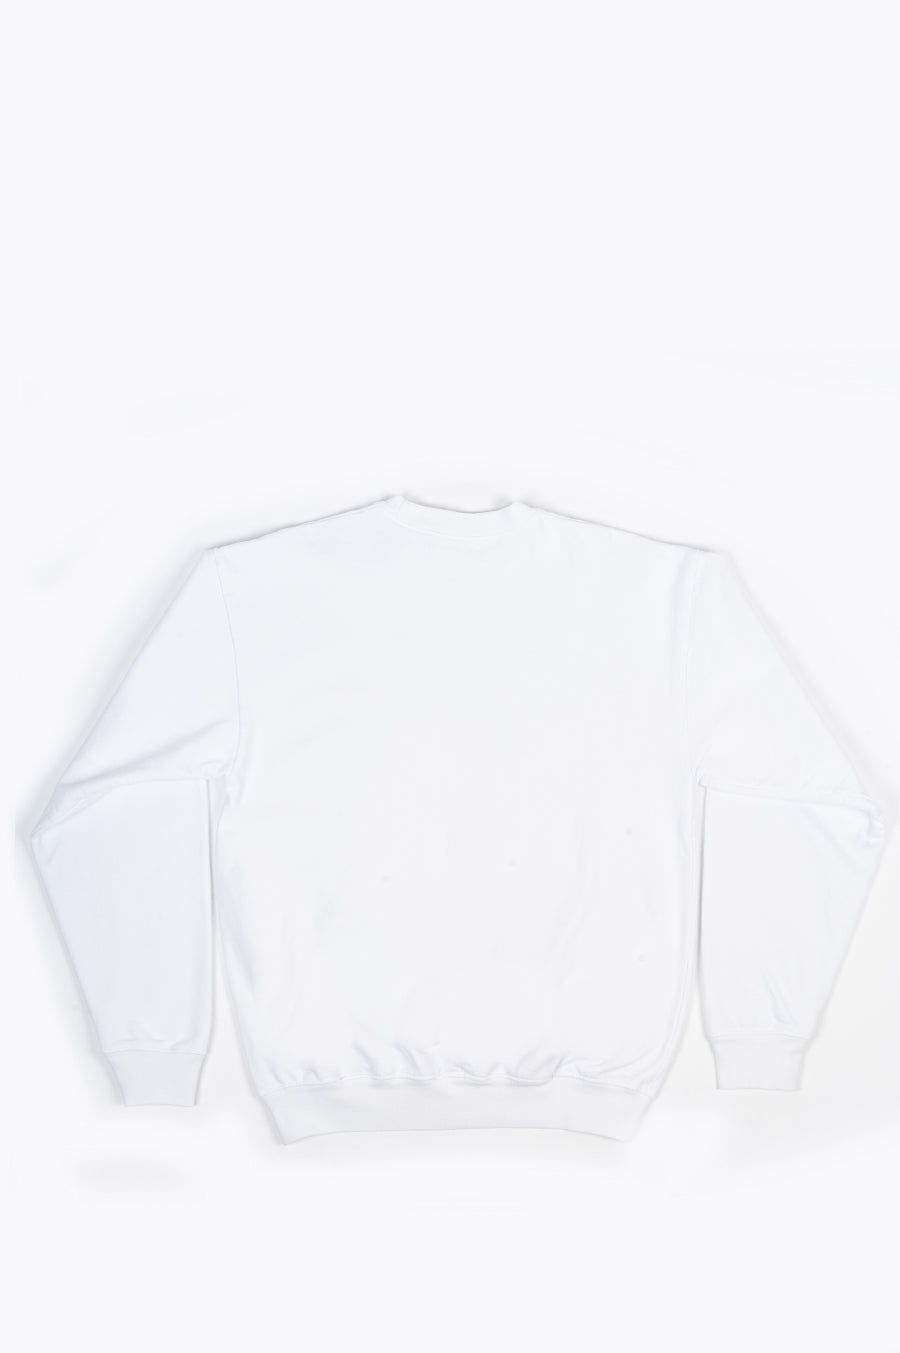 SPORTY AND RICH CLASSIC LOGO CREWNECK WHITE